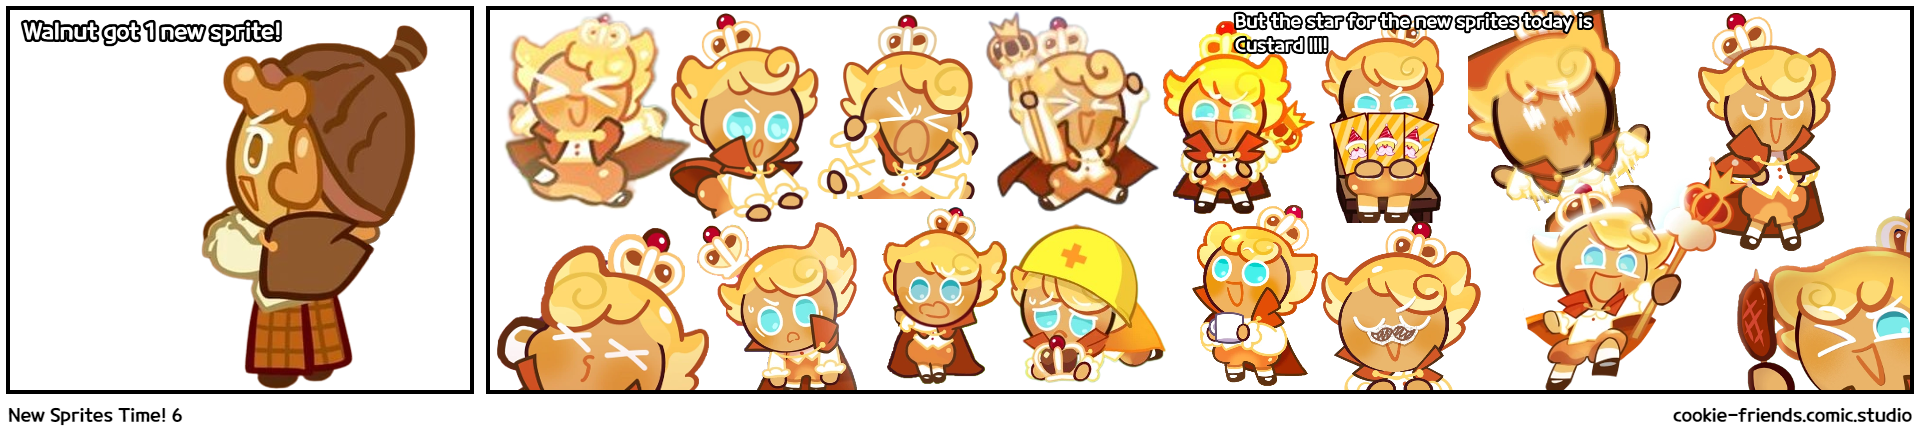 New Sprites Time! 6